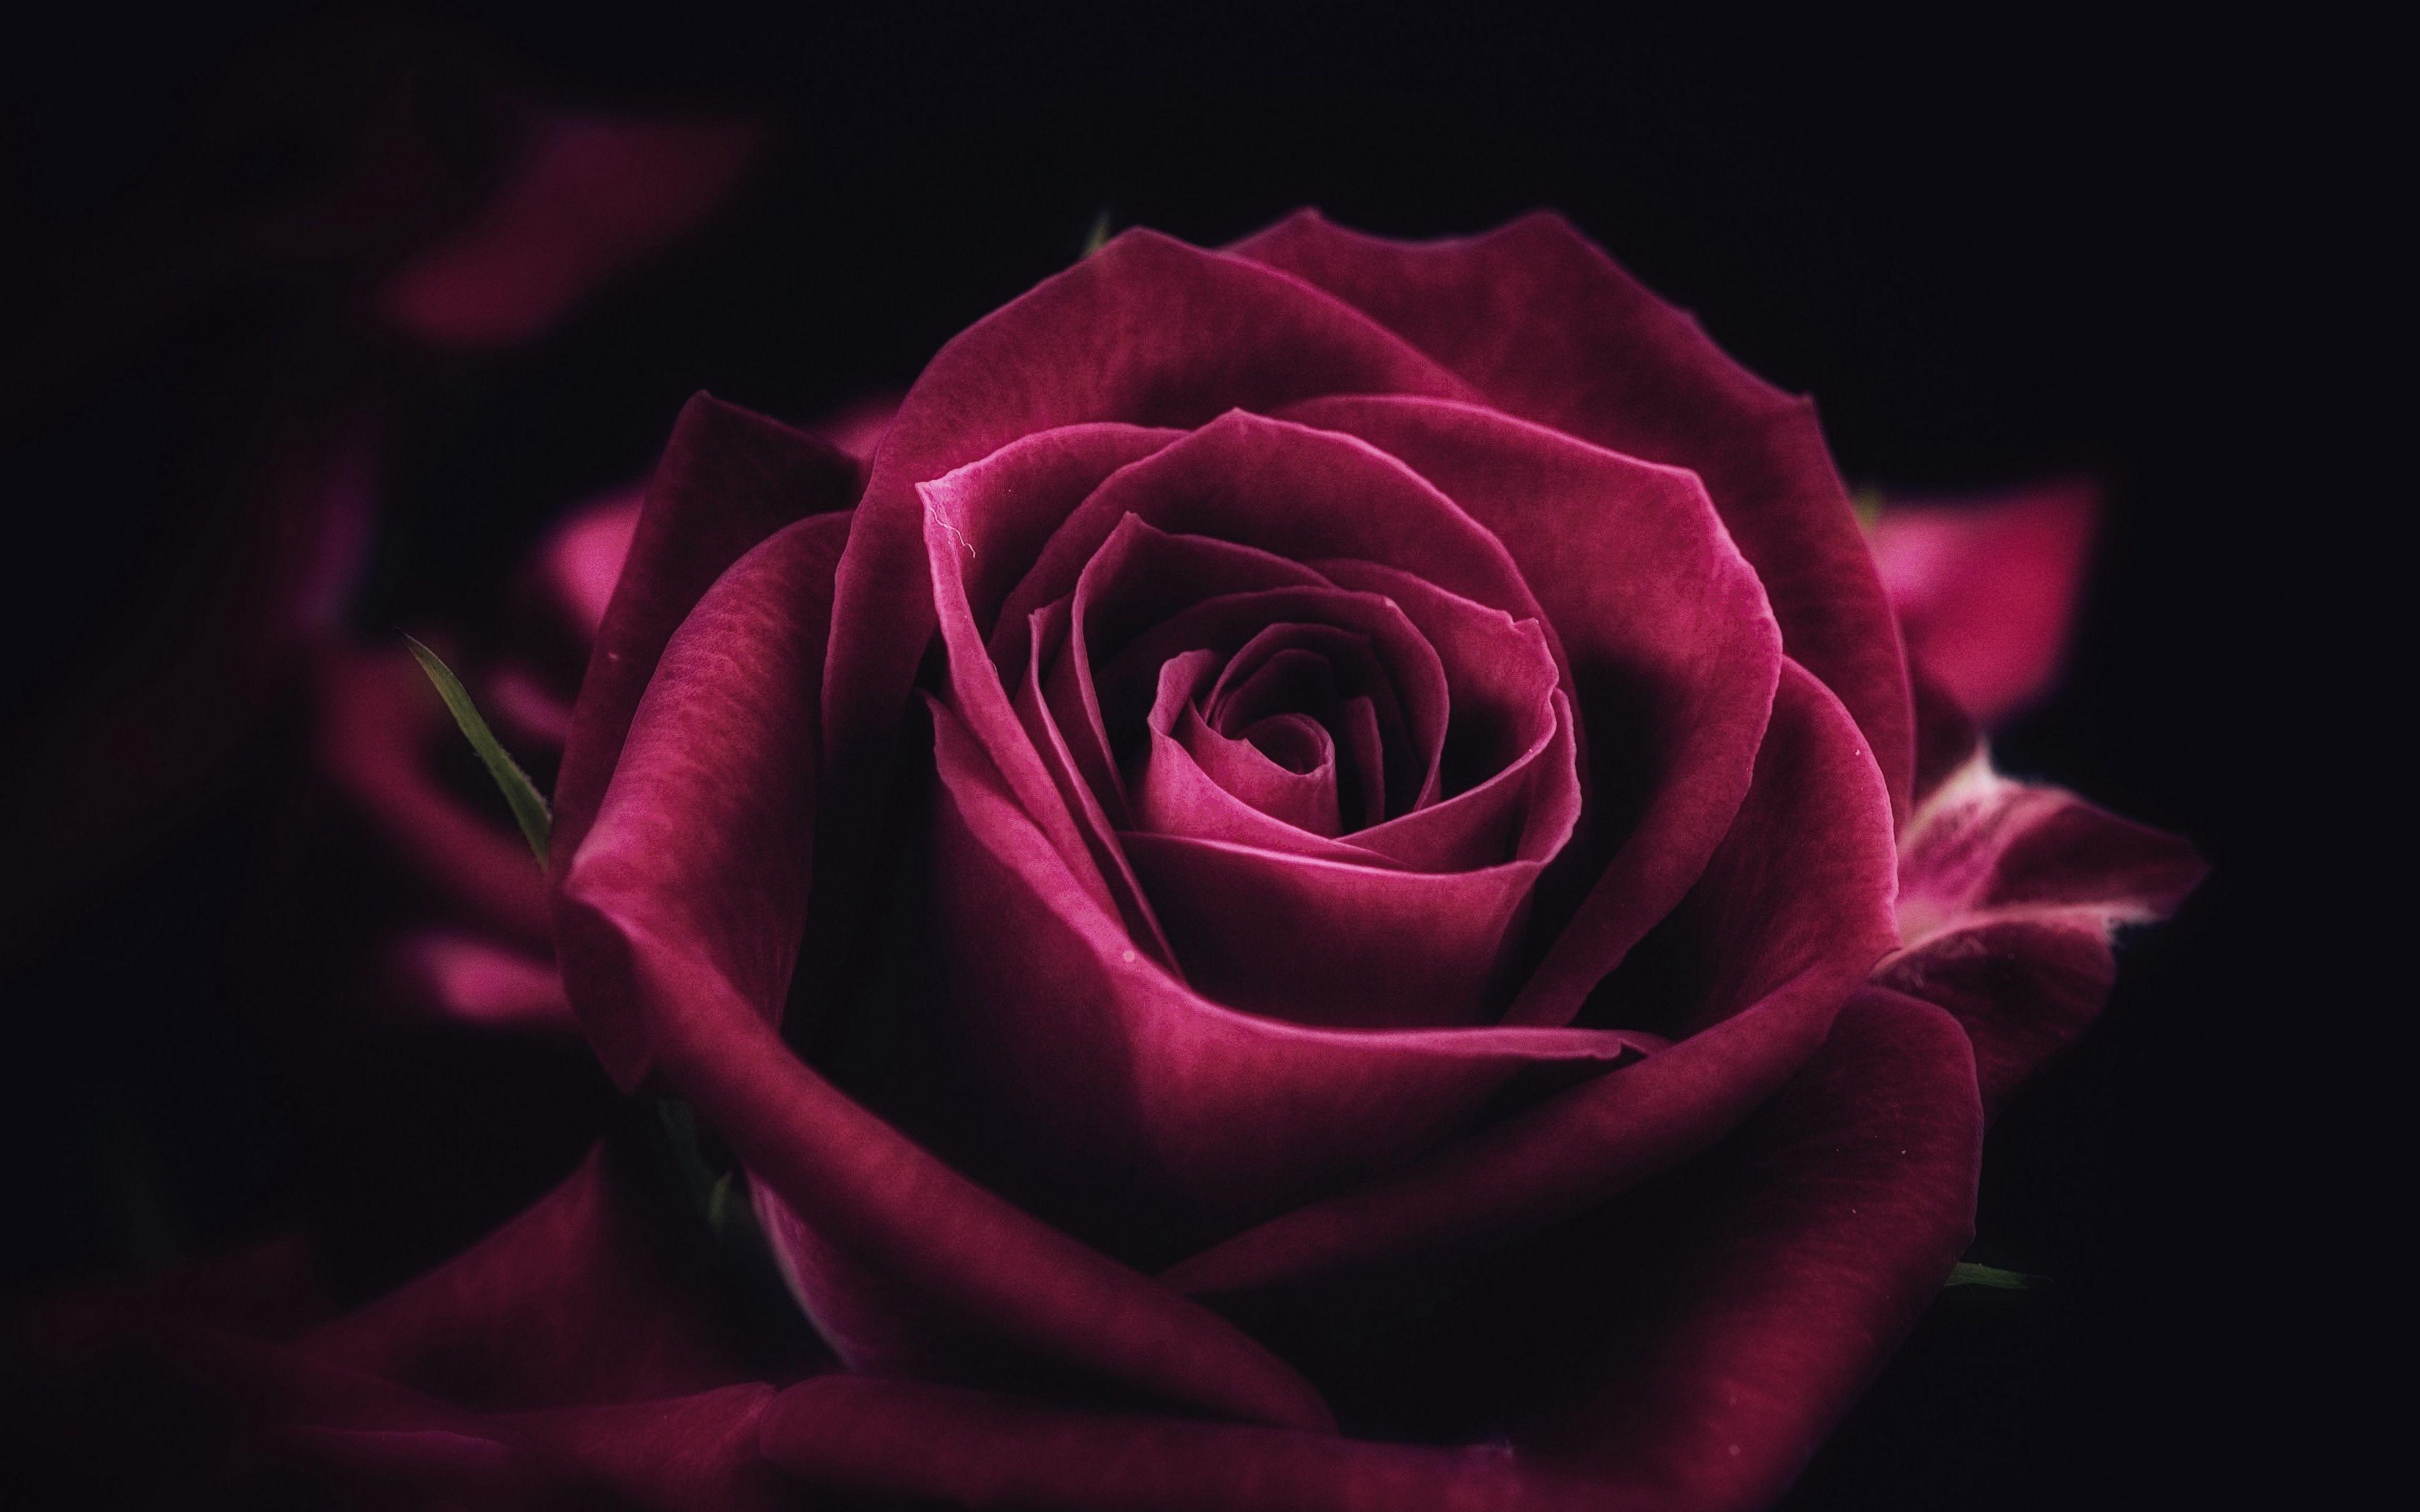 Ultra HD Rose Wallpapers - Top Free Ultra HD Rose Backgrounds